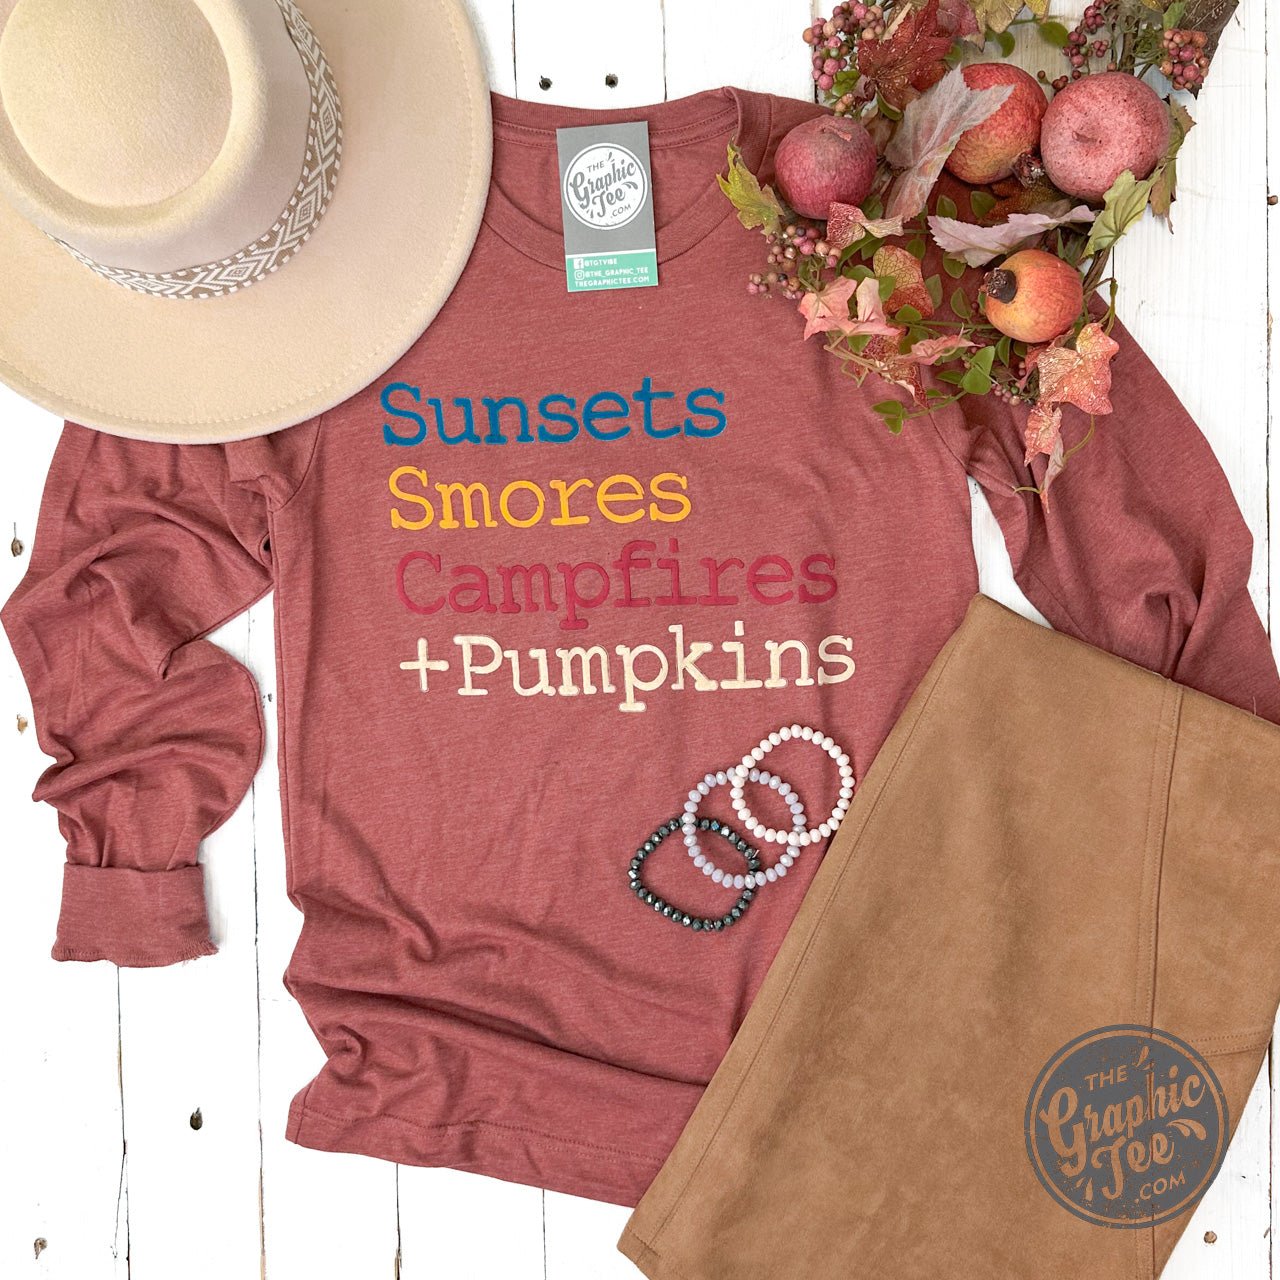 Sunsets, Smores, Campfires + Pumpkins Long Sleeve Tee - The Graphic Tee